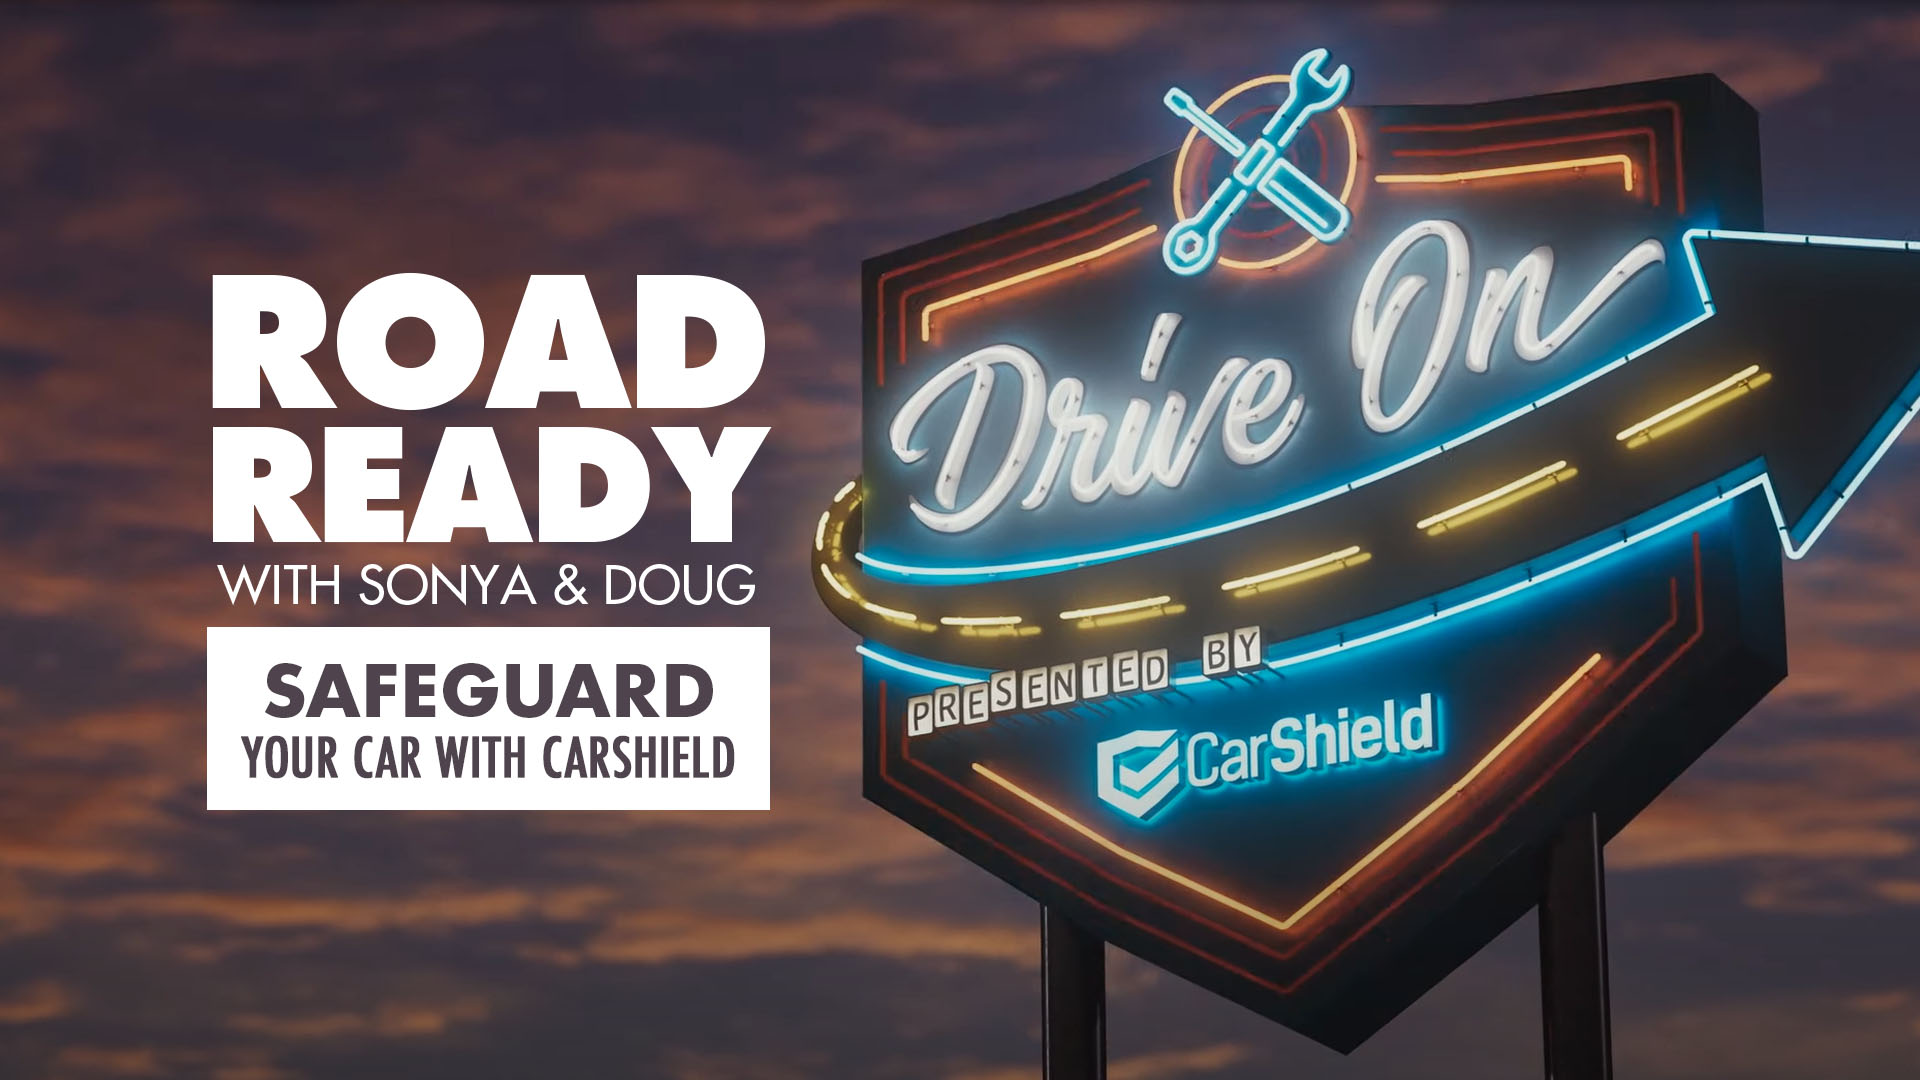 CarShield TV Drive On - Safeguard Your Car